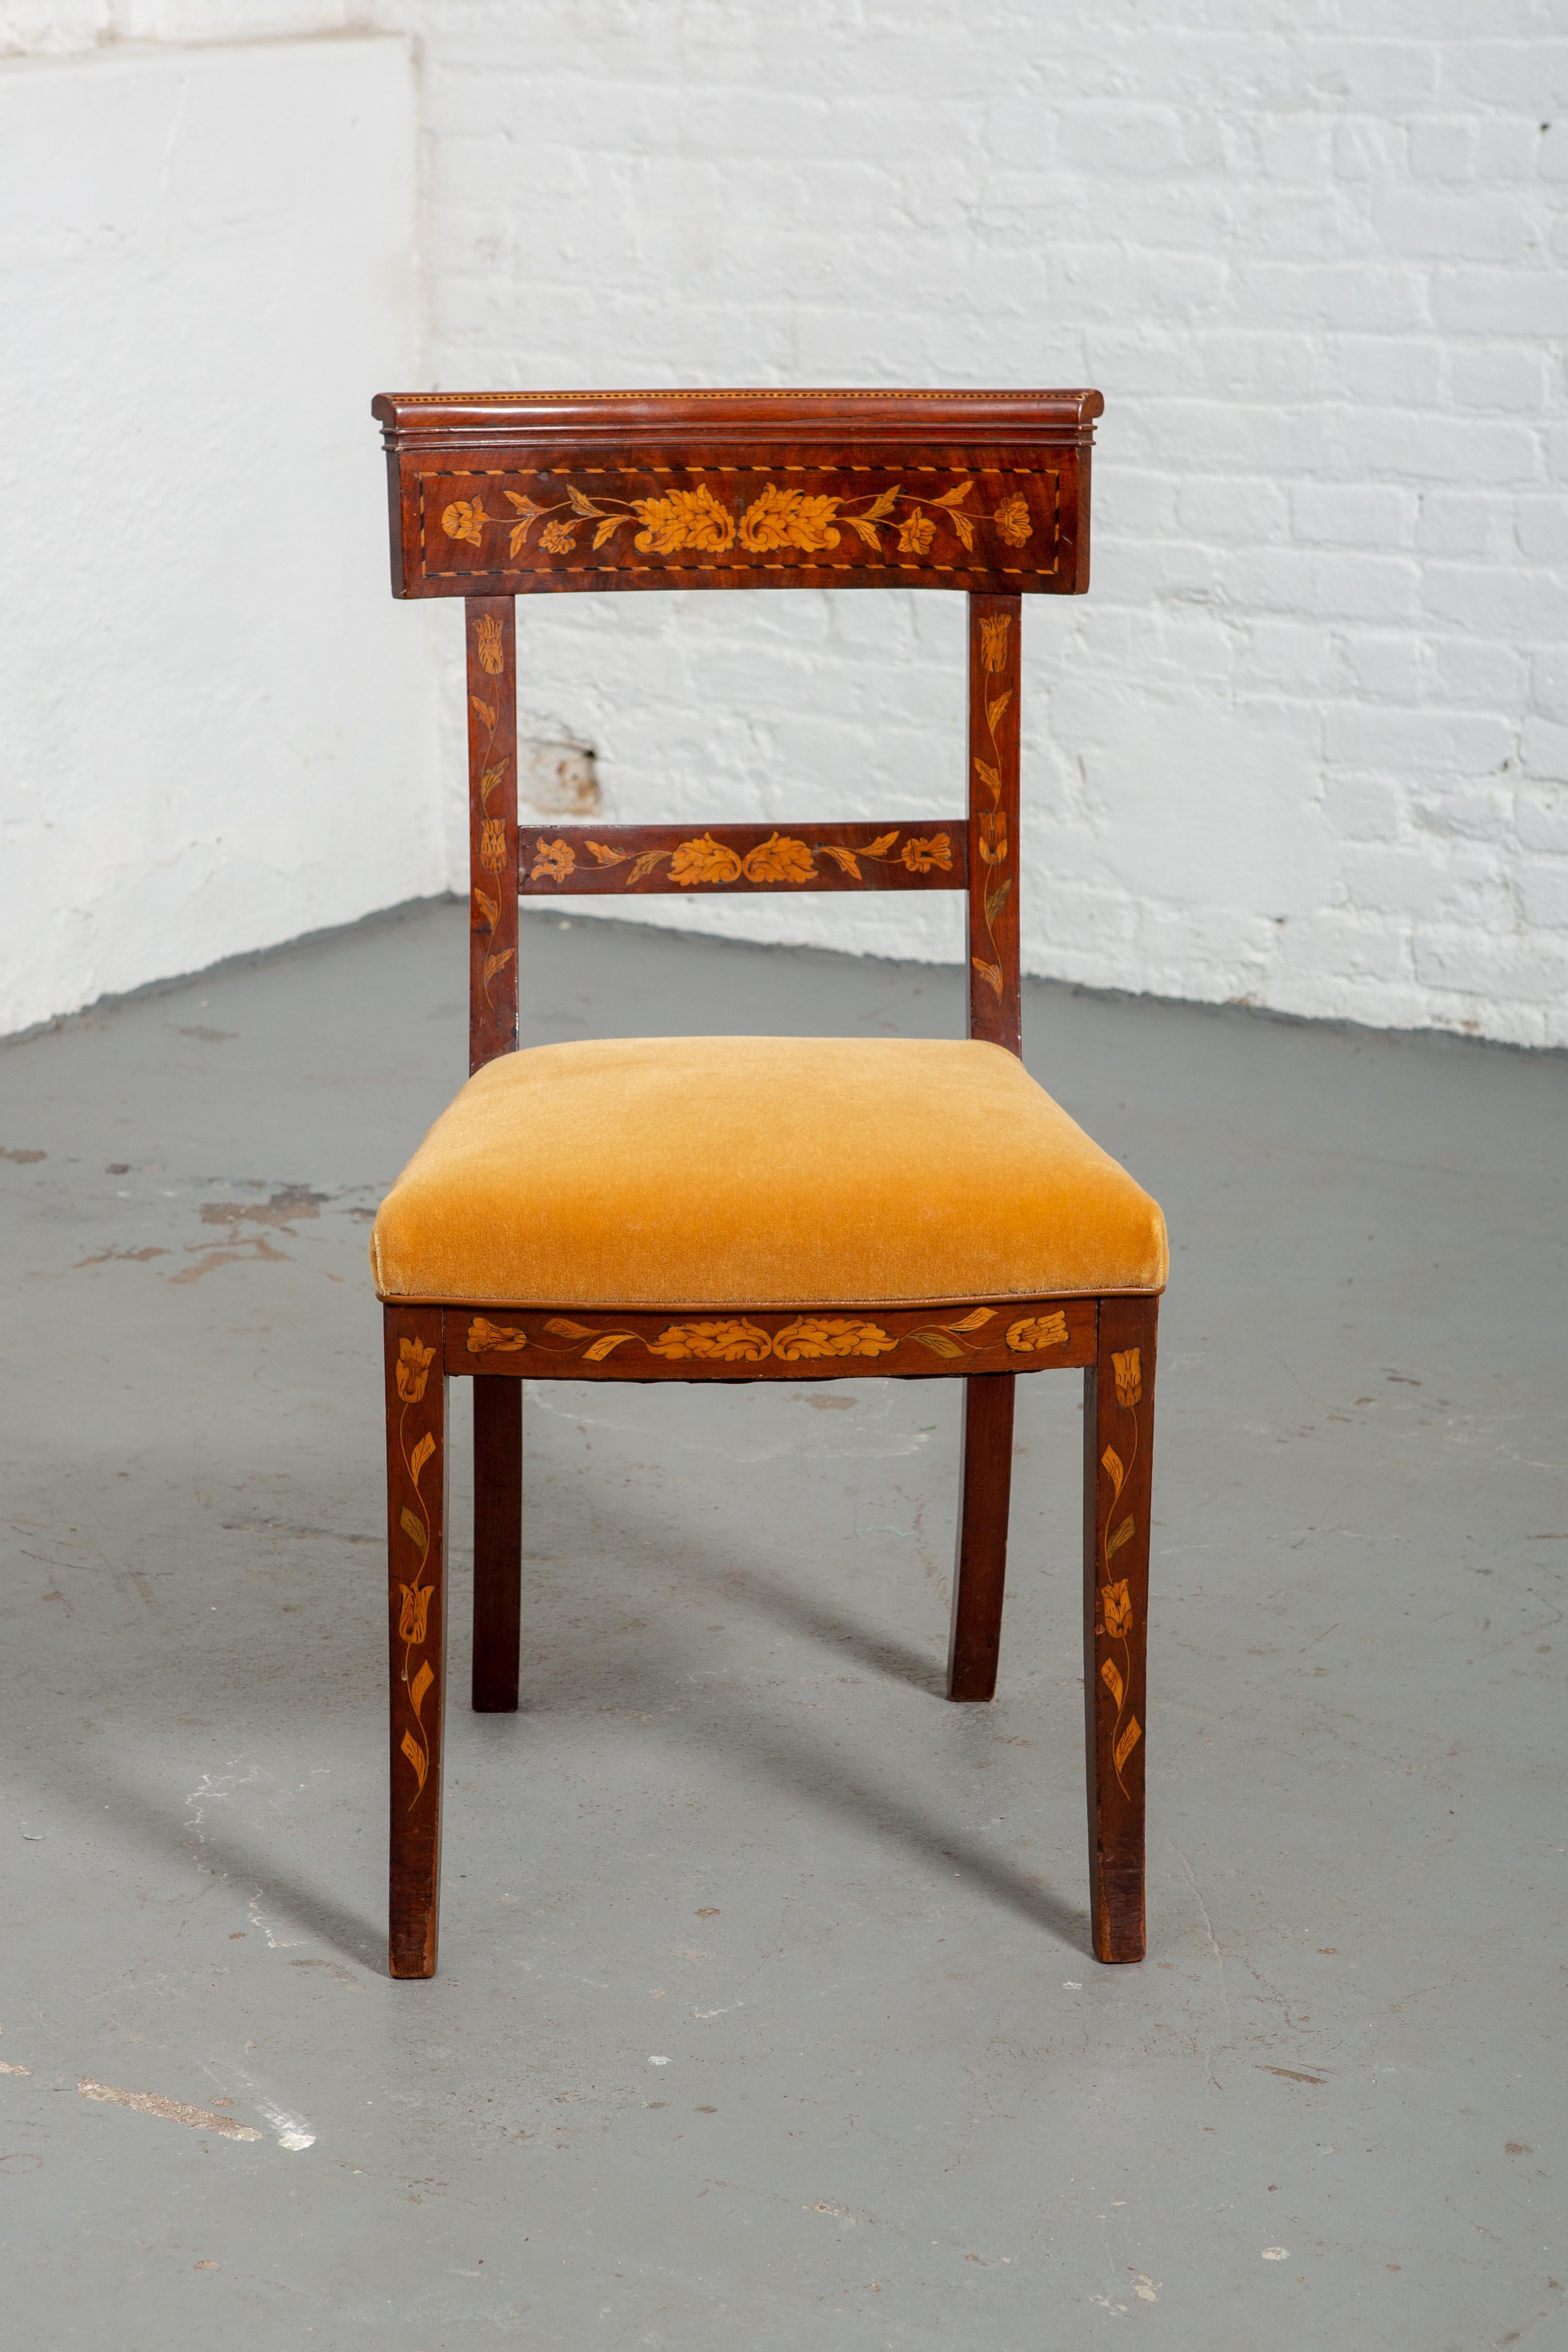 19th century Dutch marquetry side chair with new velvet upholstery. Carved wood floral details throughout. Curved back and curved and tapered legs. Wood is in very good original condition.
Seat width - 18.75